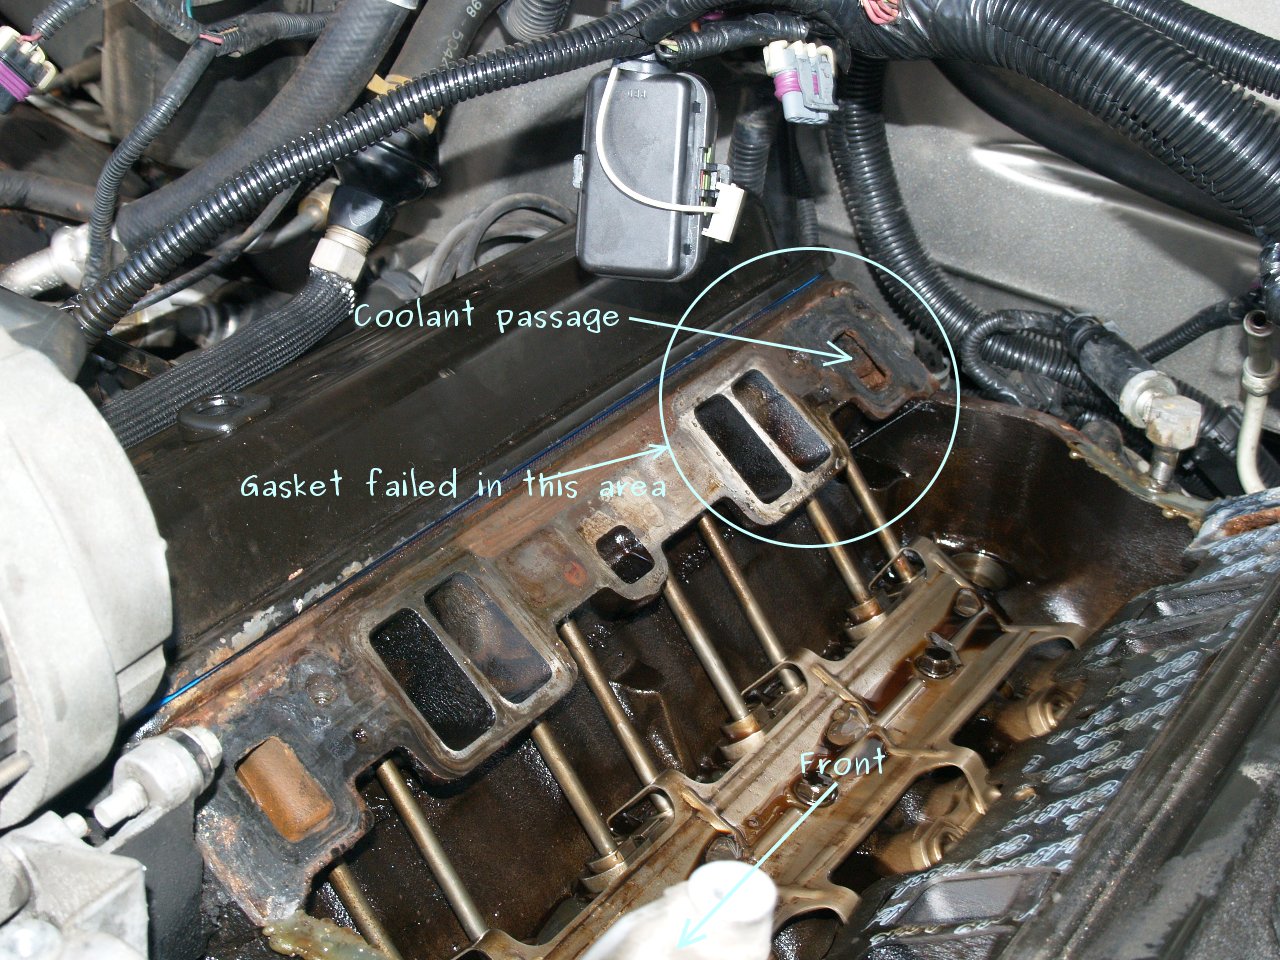 See P0467 in engine